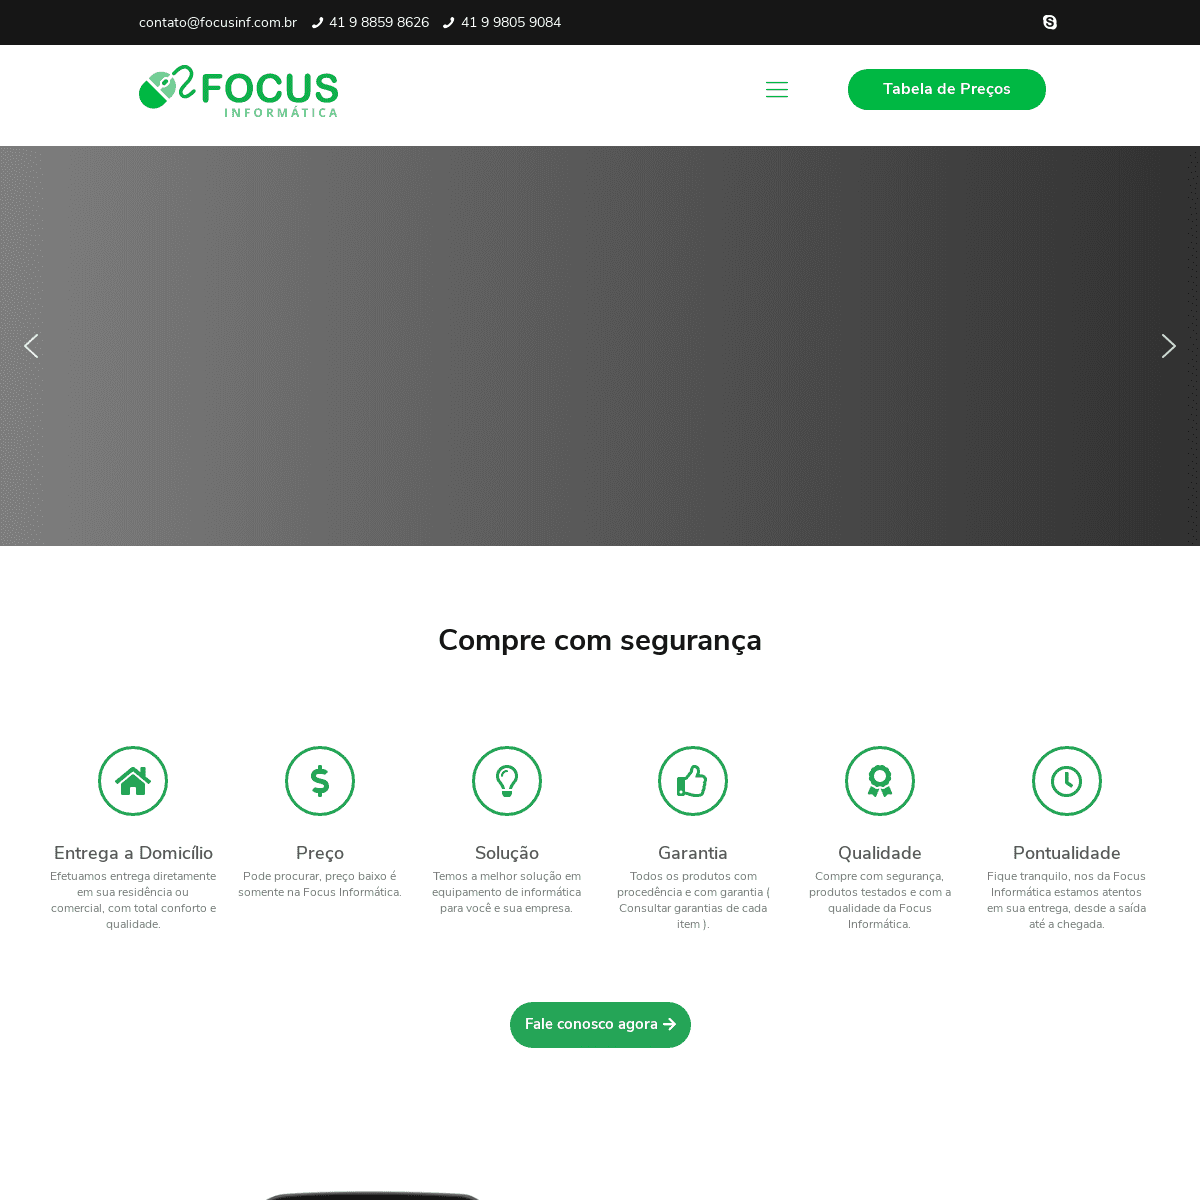 A complete backup of https://focusinf.com.br